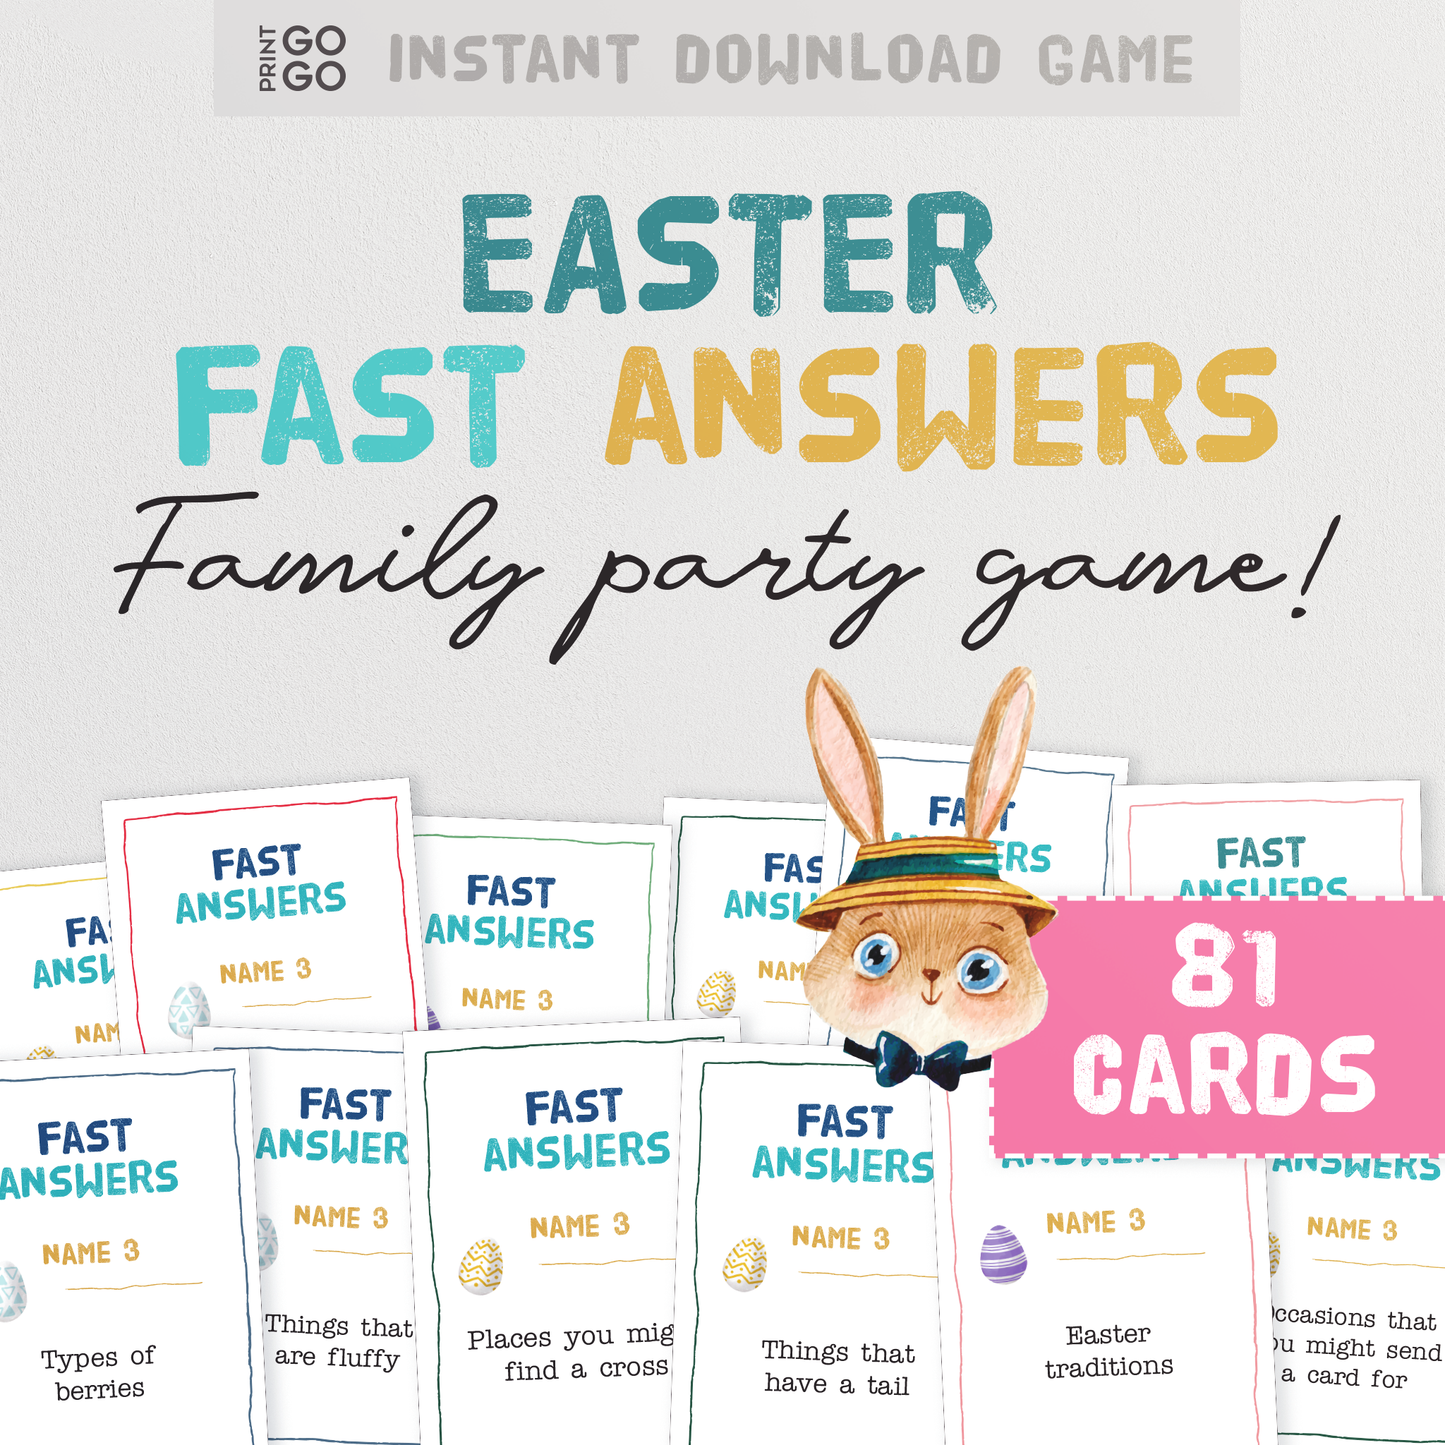 Easter Fast Answers Game - The Fun Quick Thinking Family Party Game